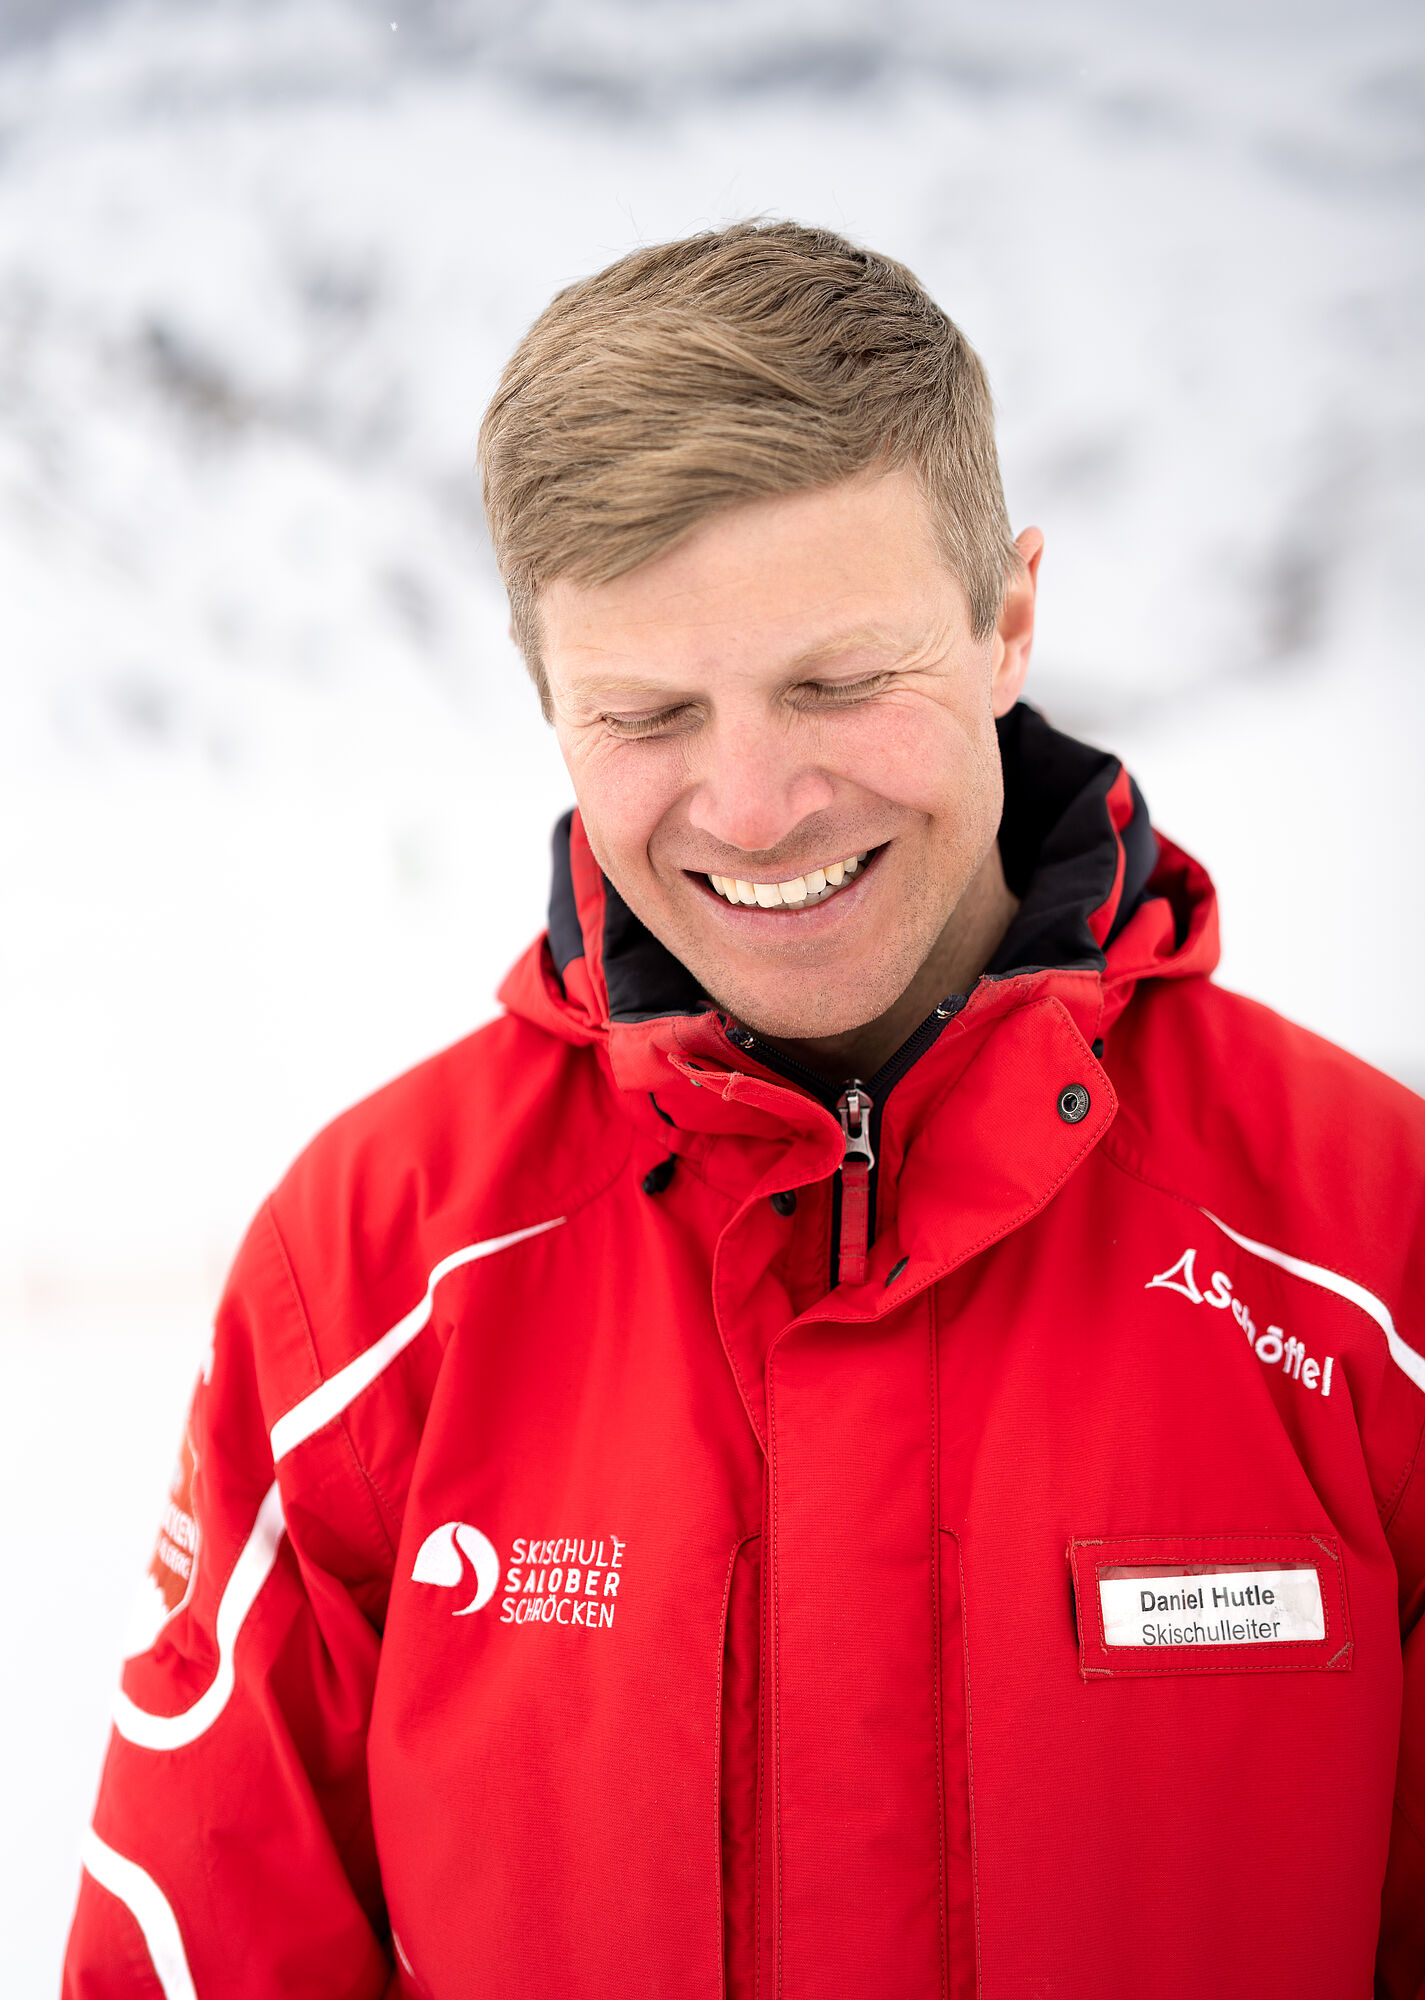 Daniel, the ski school manager, grins broadly into the camera, looking down as he does so